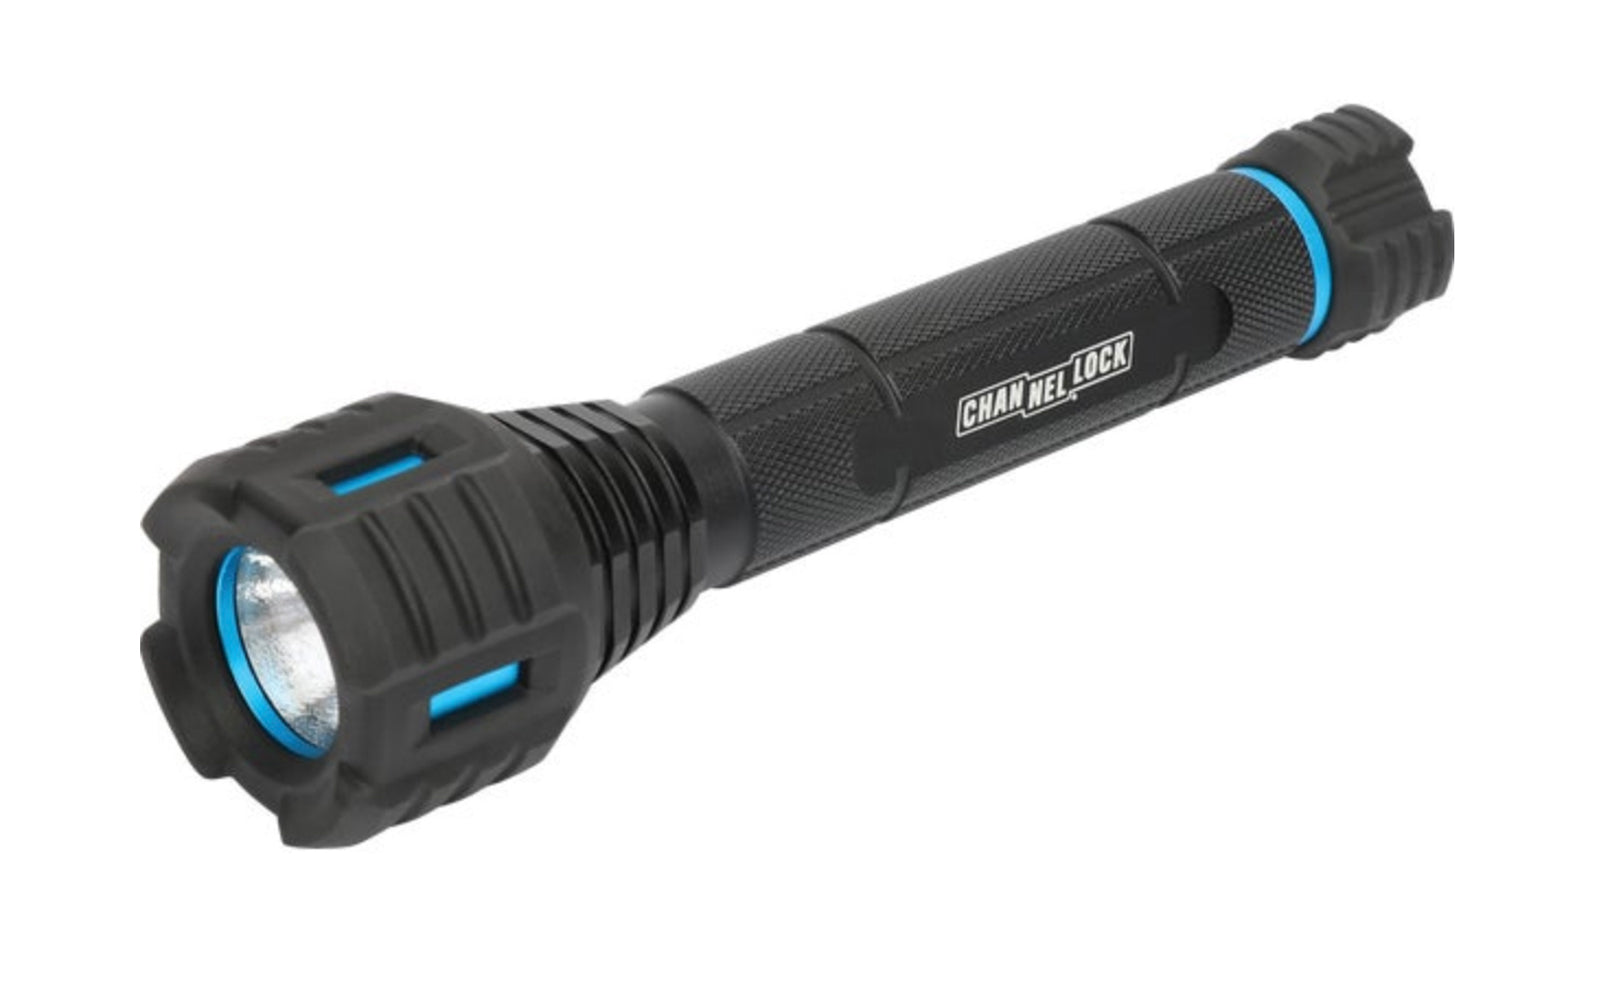 Channellock Flashlight - 90 Lumens. Full aluminum body with rubber head and tail cap to absorb impact. High performance LED (light emitting diode) with high, low, and strobe settings. Made by Channellock.